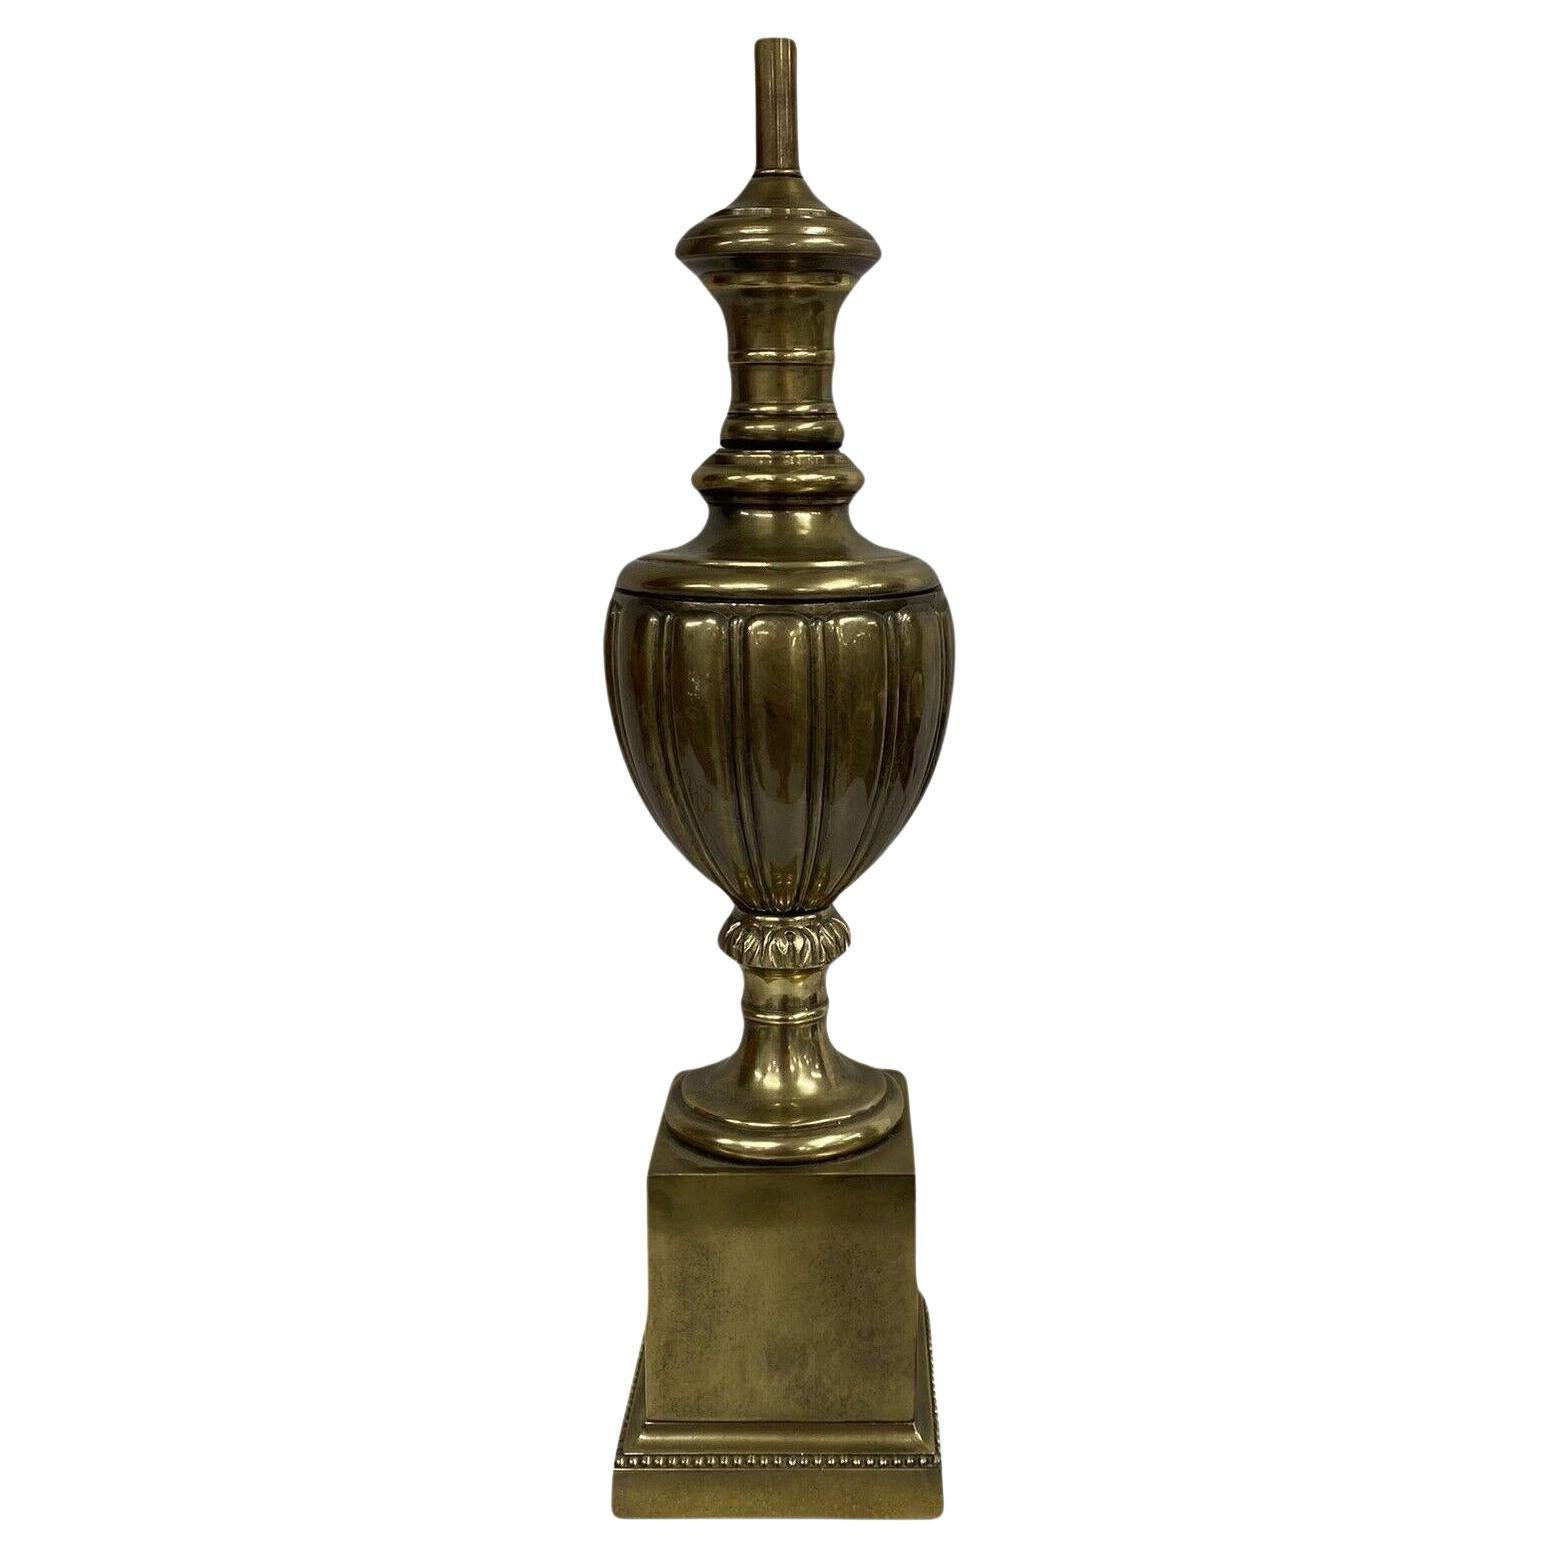 A single circa 1940’s French neoclassic bronze lamp.

Measurements:
Height of body :22